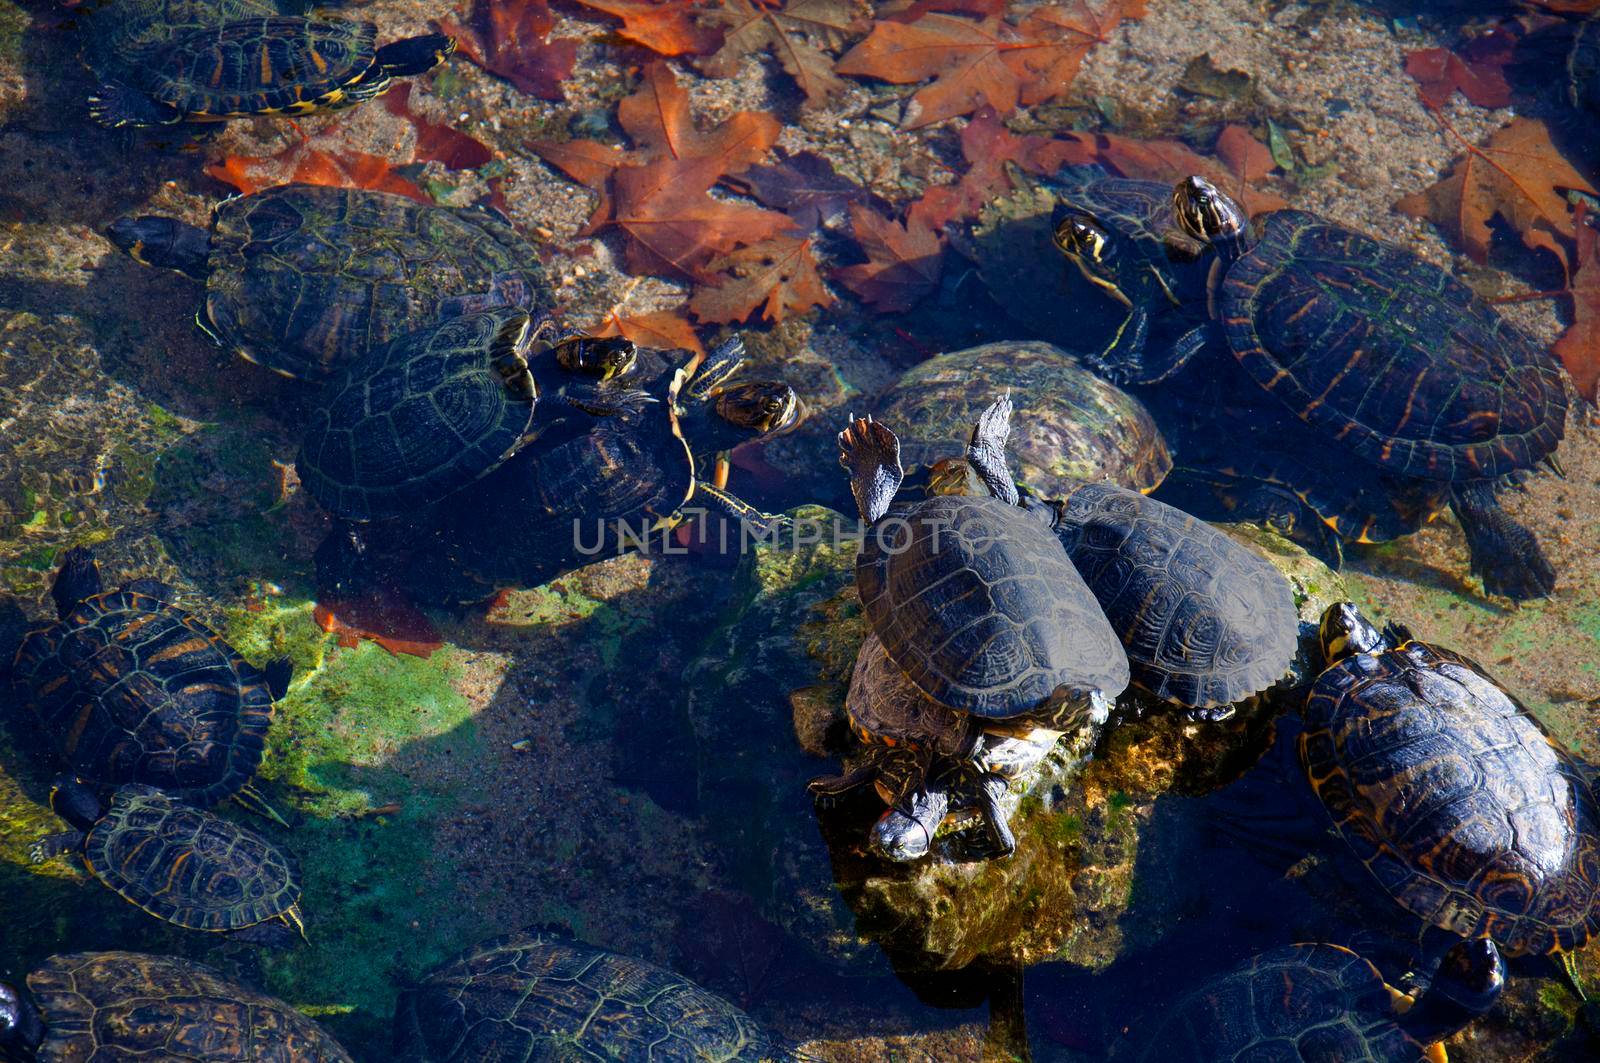 Black turtles having sun in the small pond by Bezdnatm